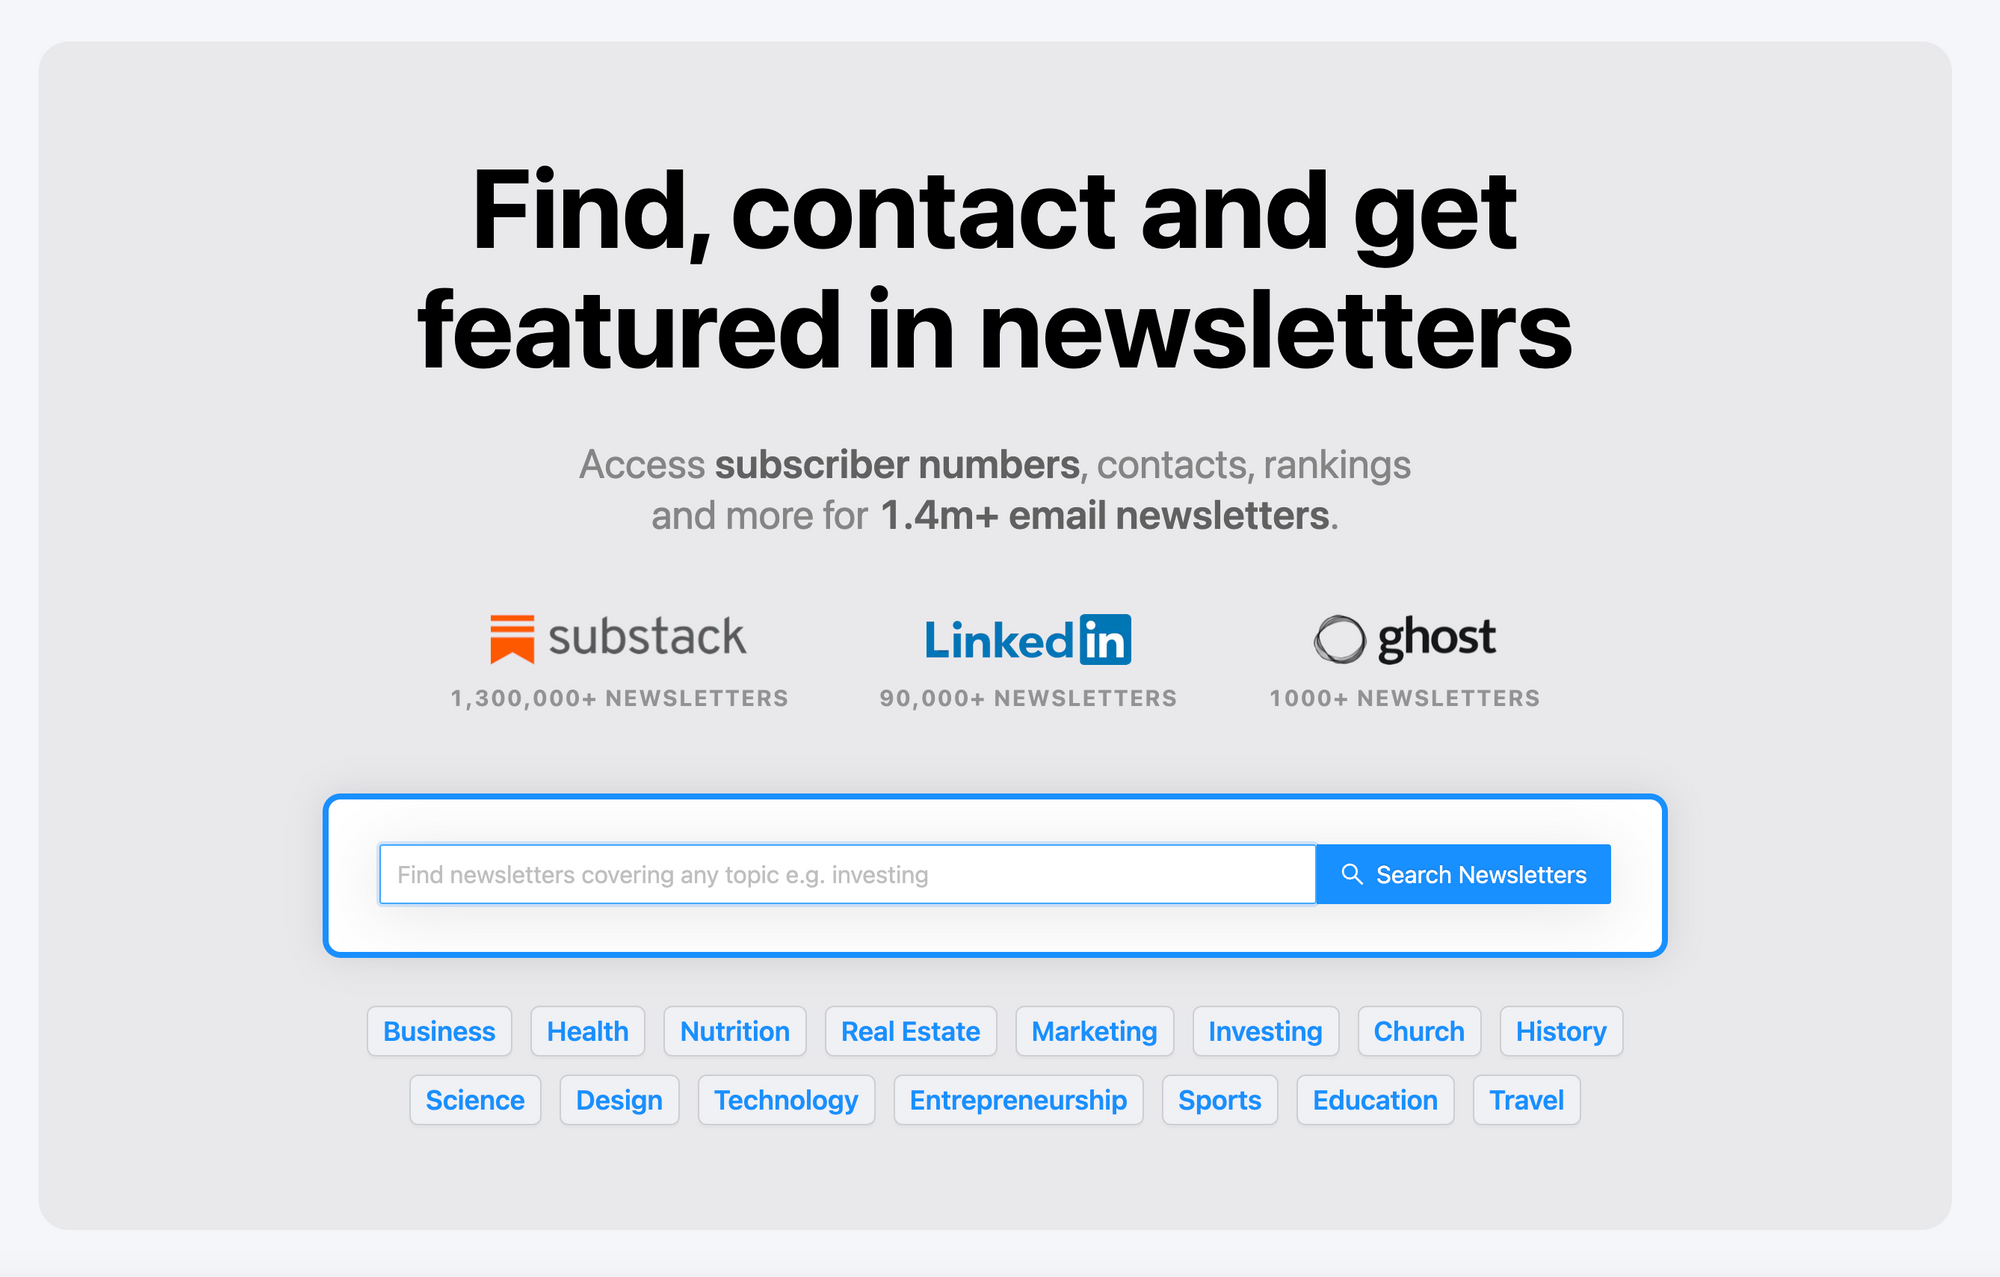 Best Newsletter Directory: Data & Contacts for 1.4m Newsletters